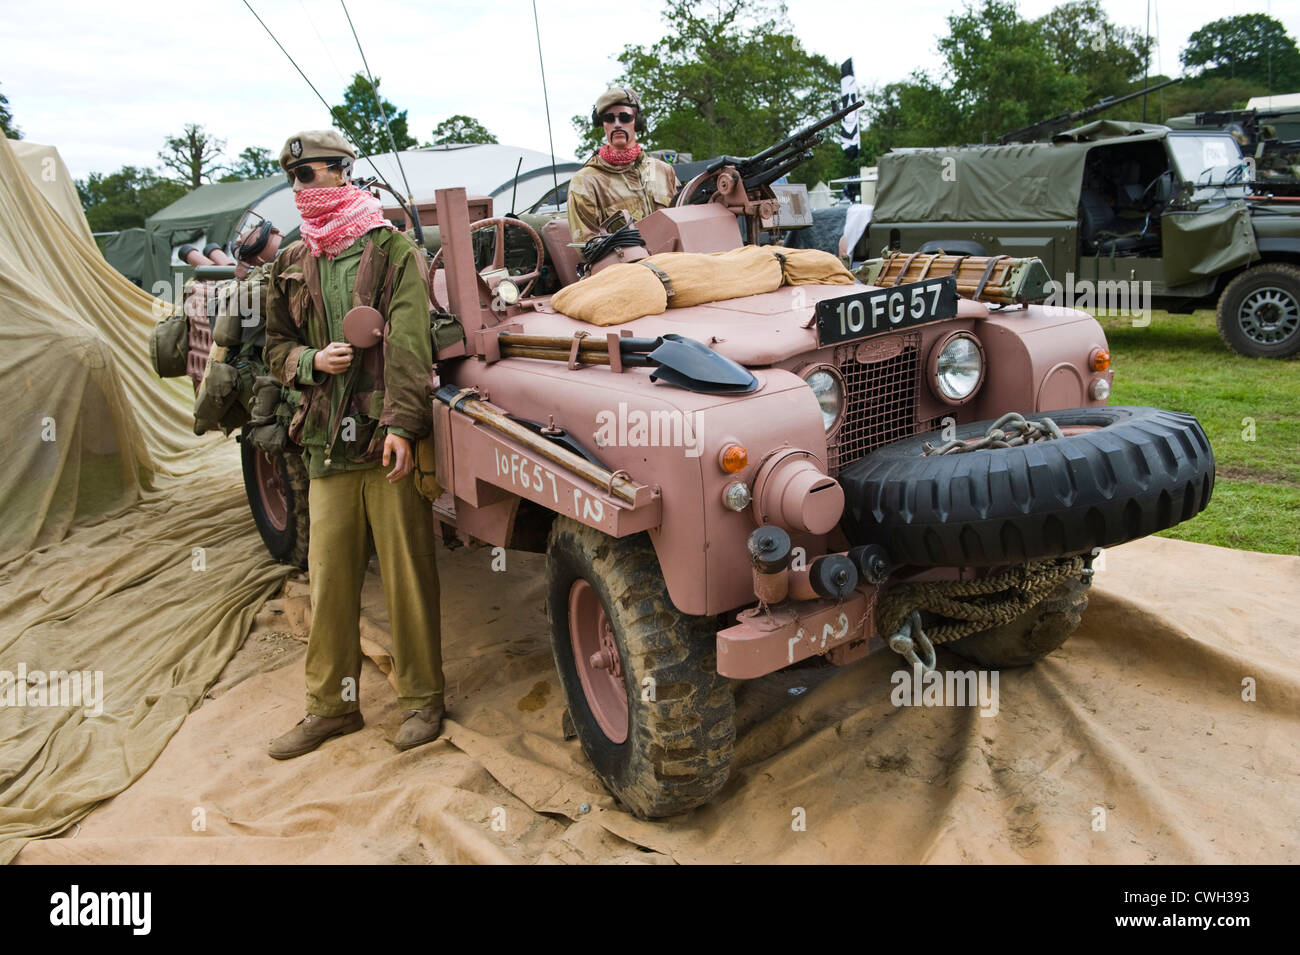 Land Rover 4x4 SAS special forces Pink Panther military vehicle at annual Eastnor Land Rover Show Herefordshire England UK Stock Photo